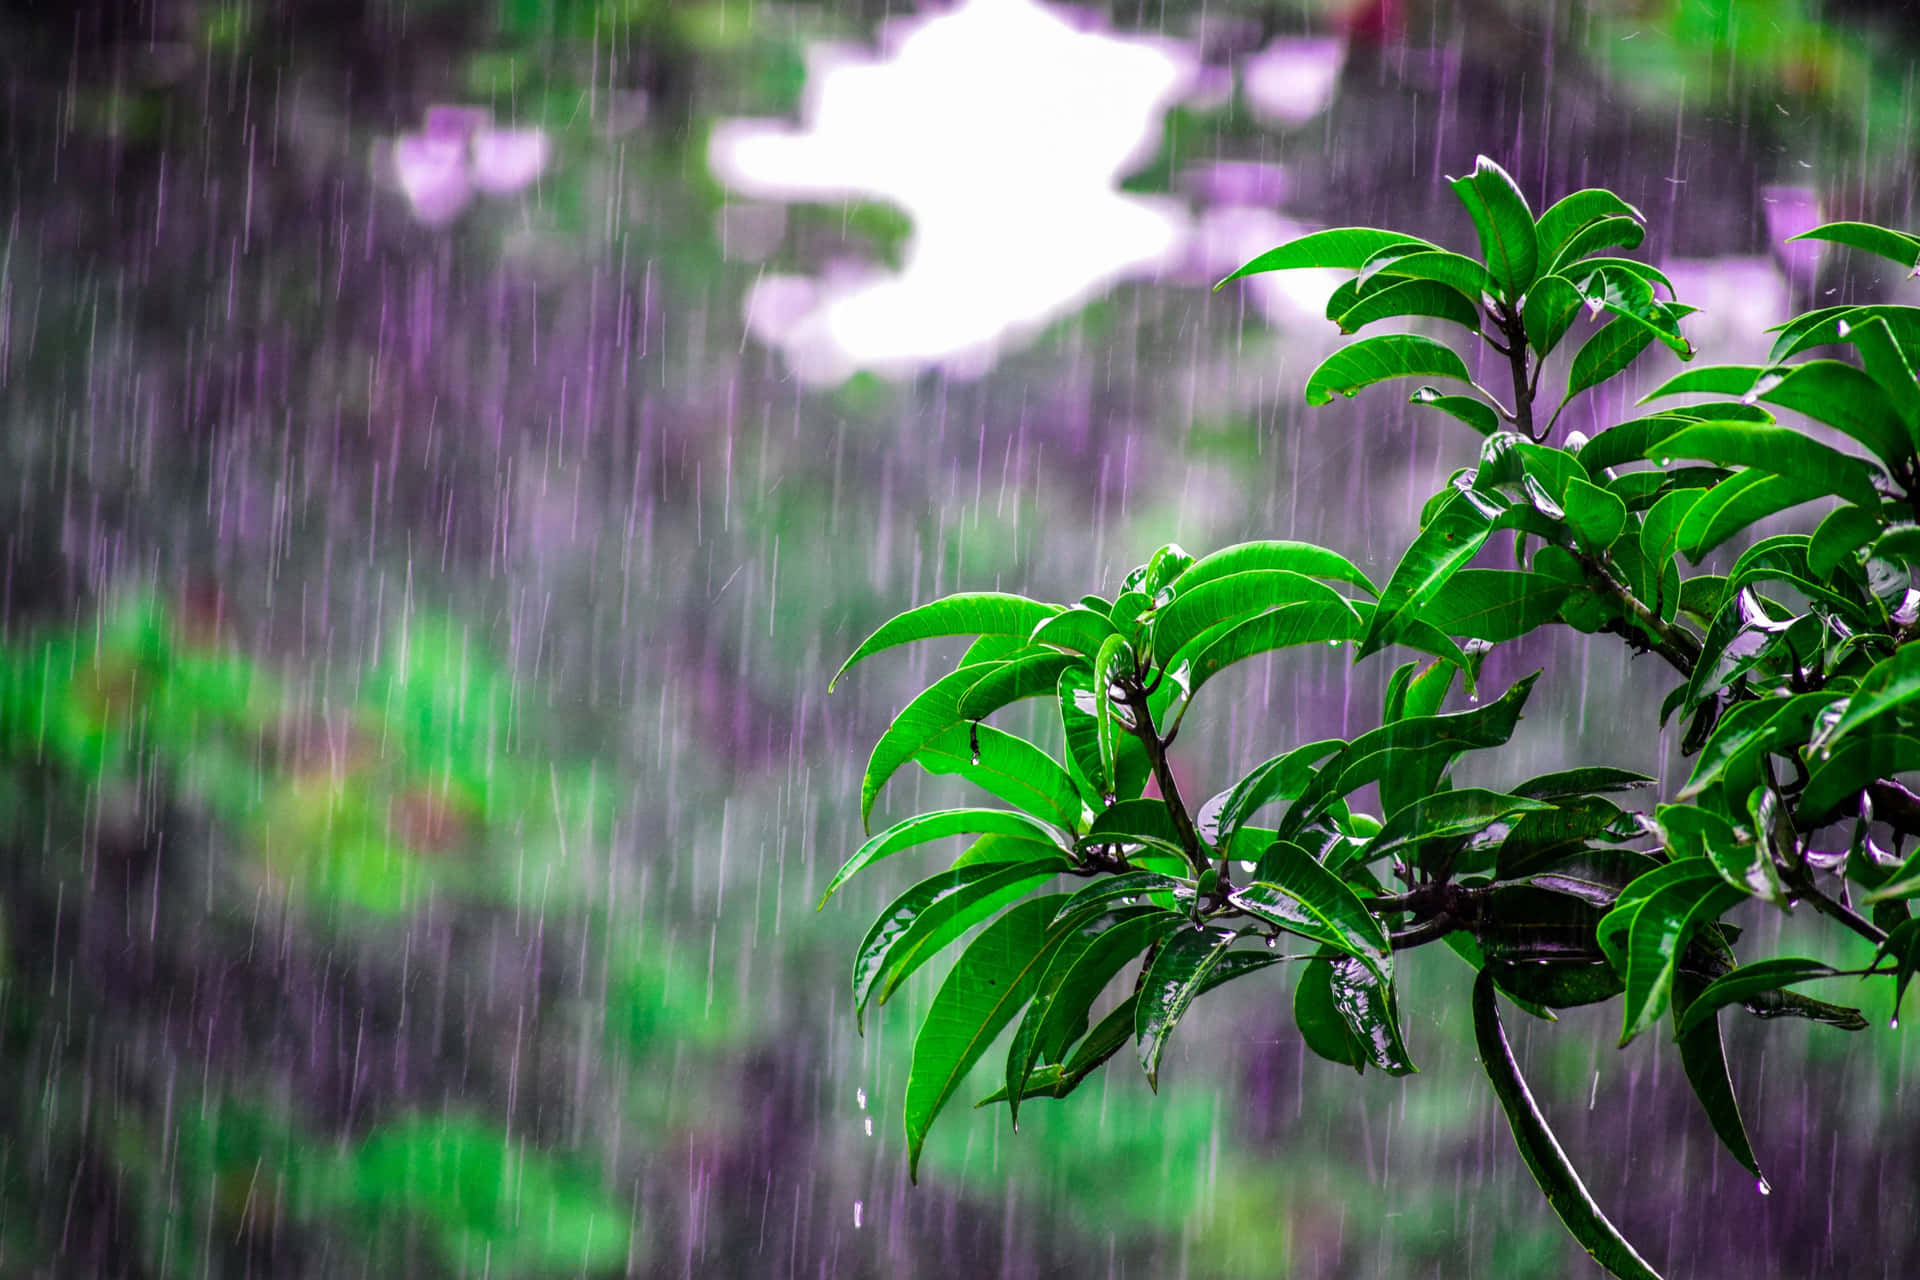 Enjoy the sound and beauty of nature's rain.